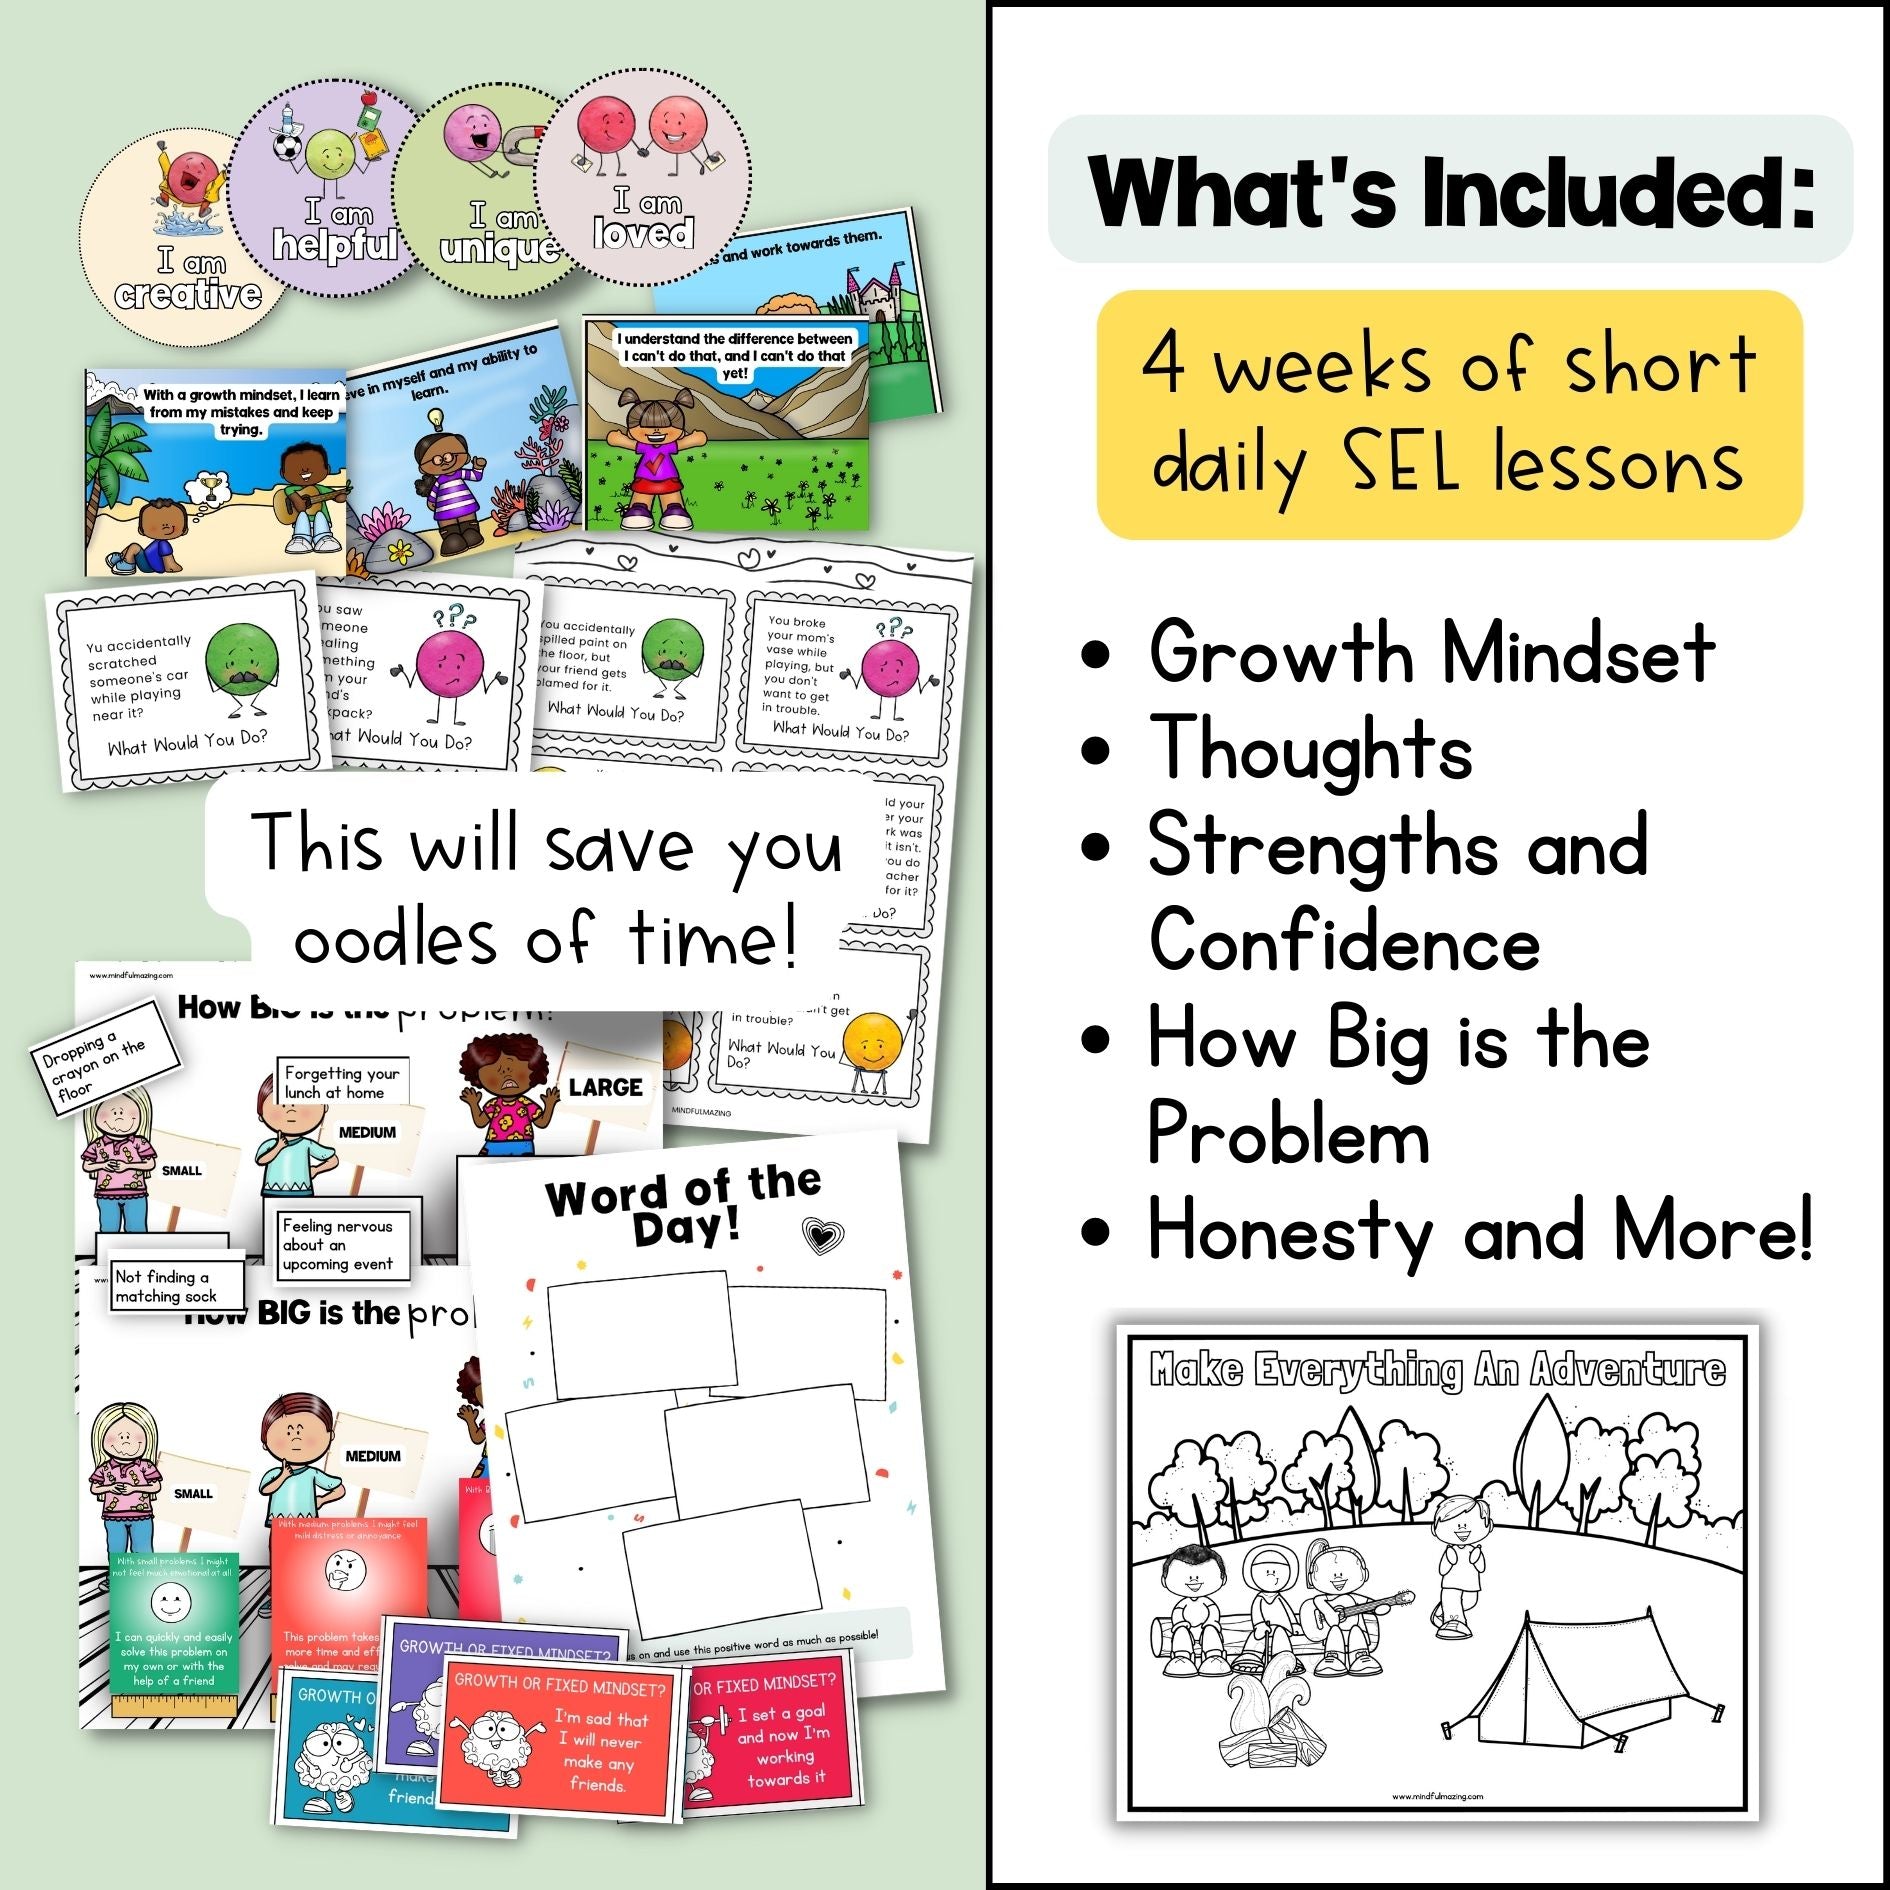 Growth Mindset Social Emotional Learning Unit (ages 3 - 8)